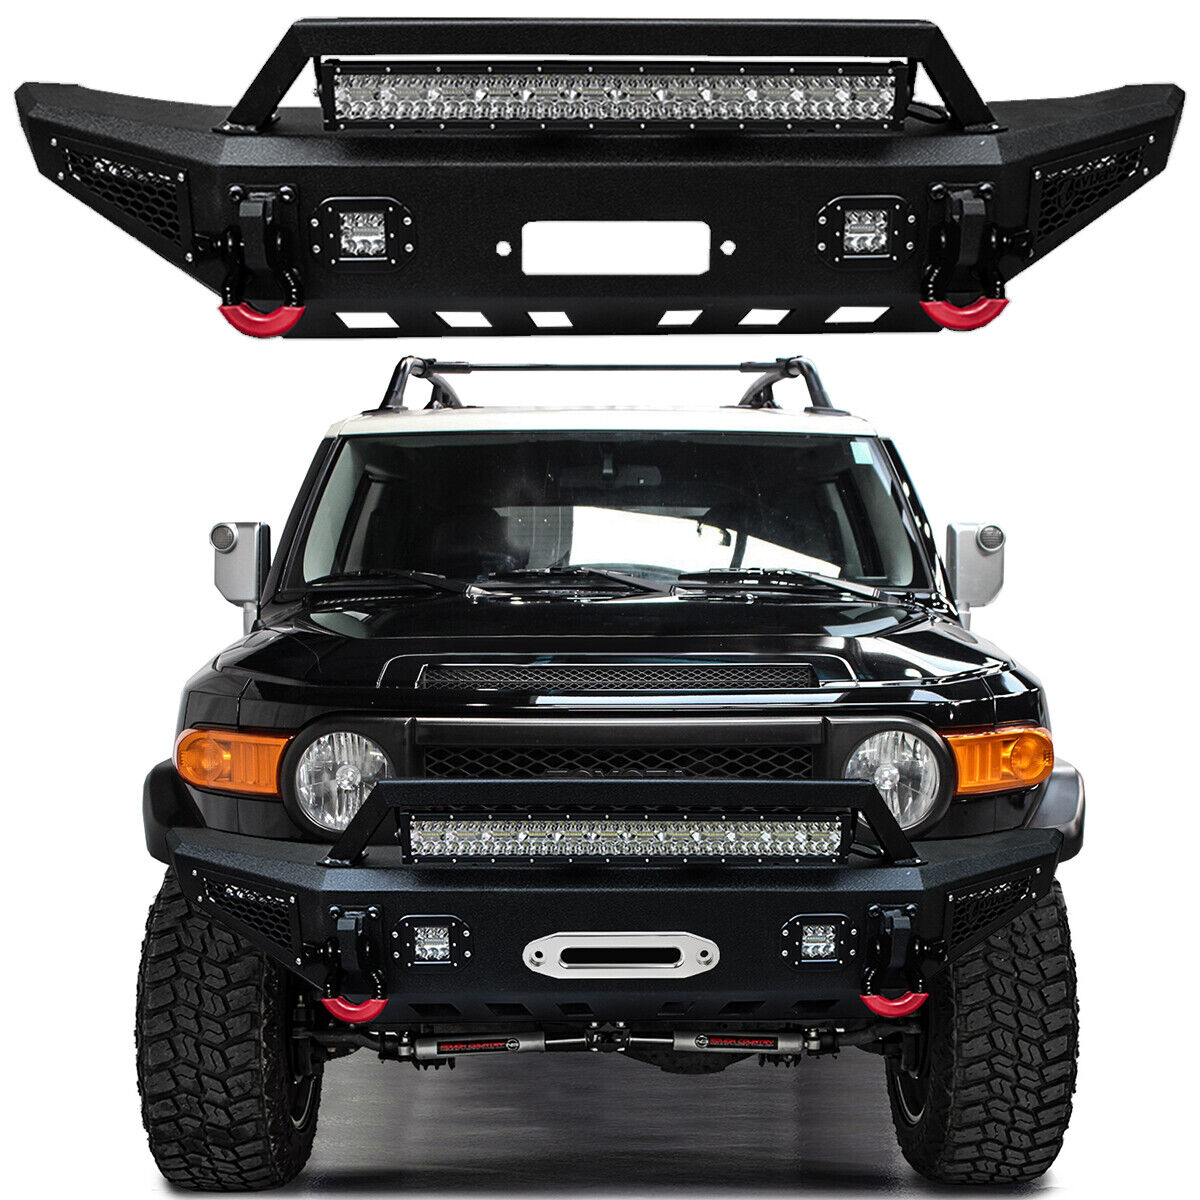 For 2007-2014 1st Gen FJ Cruiser Front or Rear Bumper w/D-Ring and LED Lights